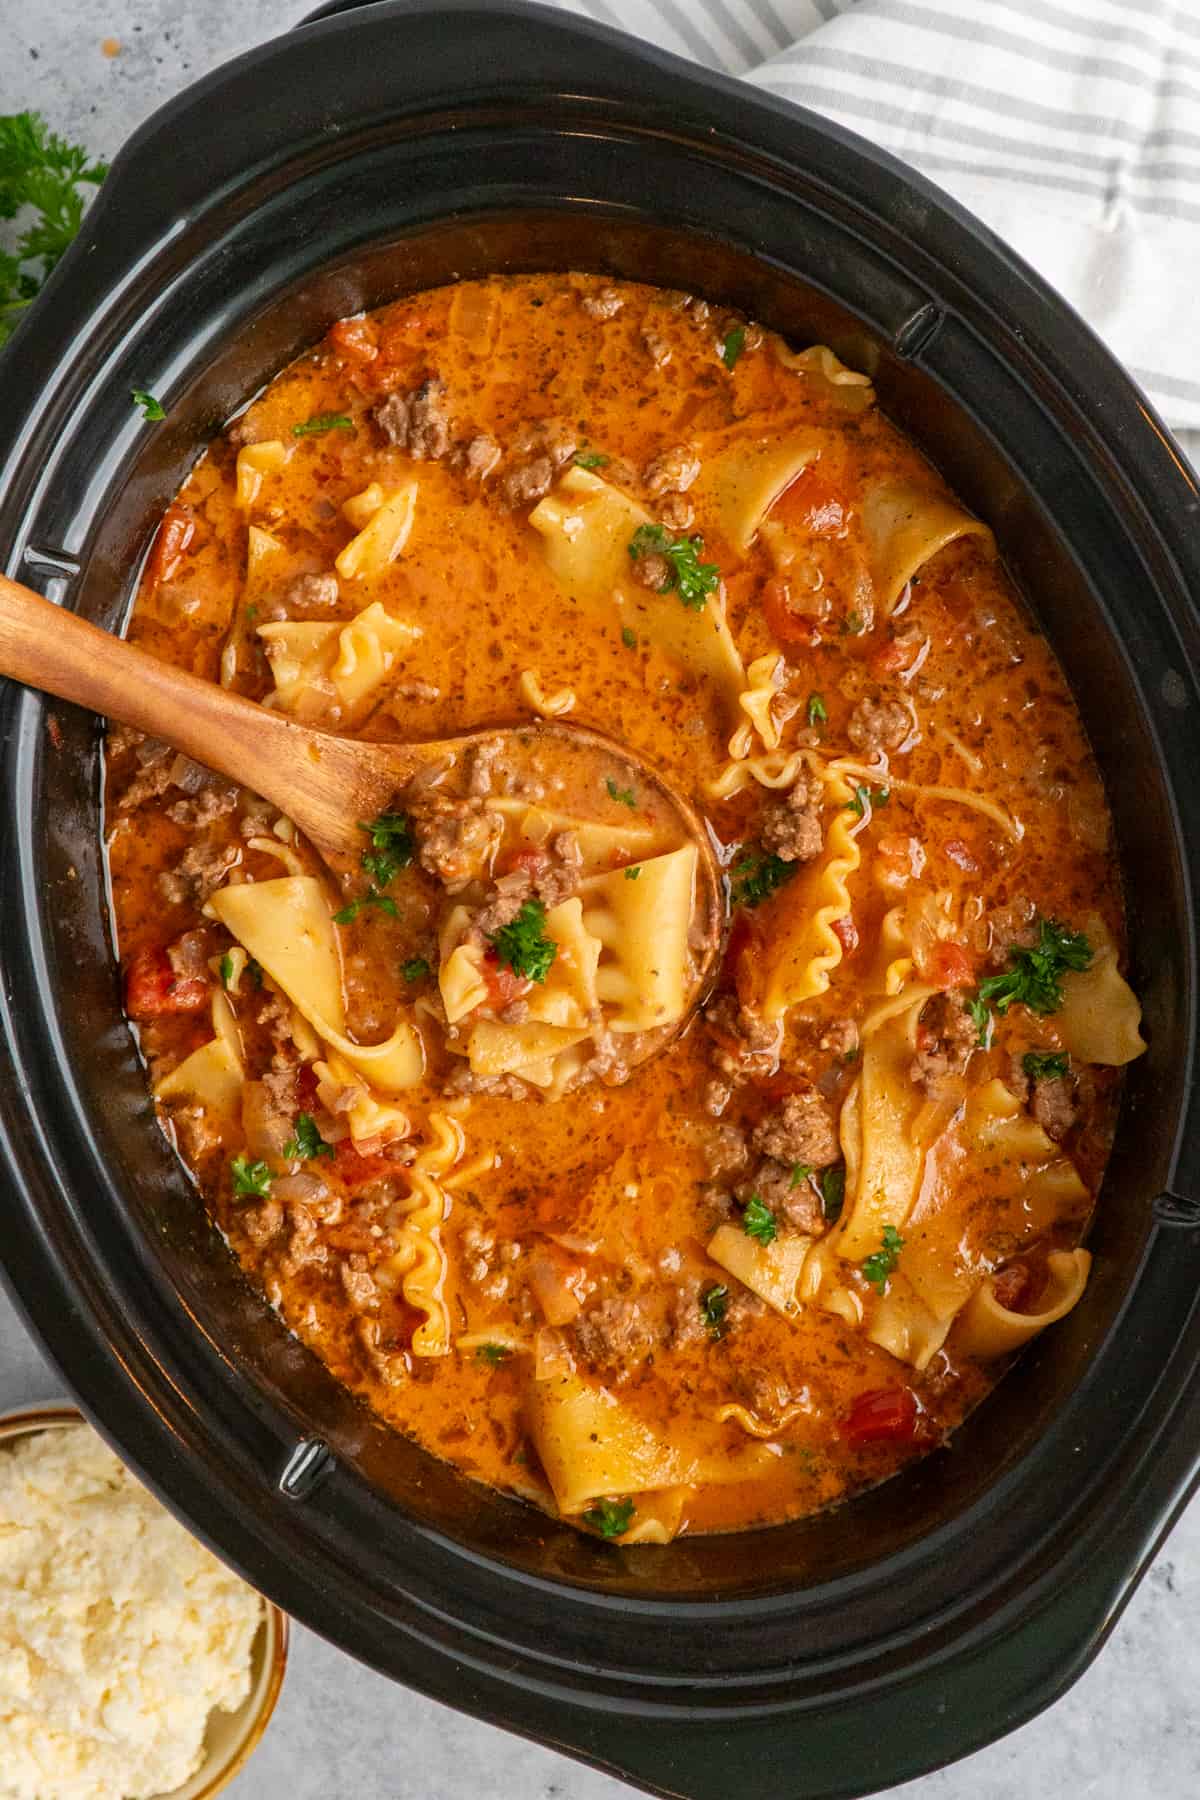 A wooden ladle of lasagna soup in a slow cooker.